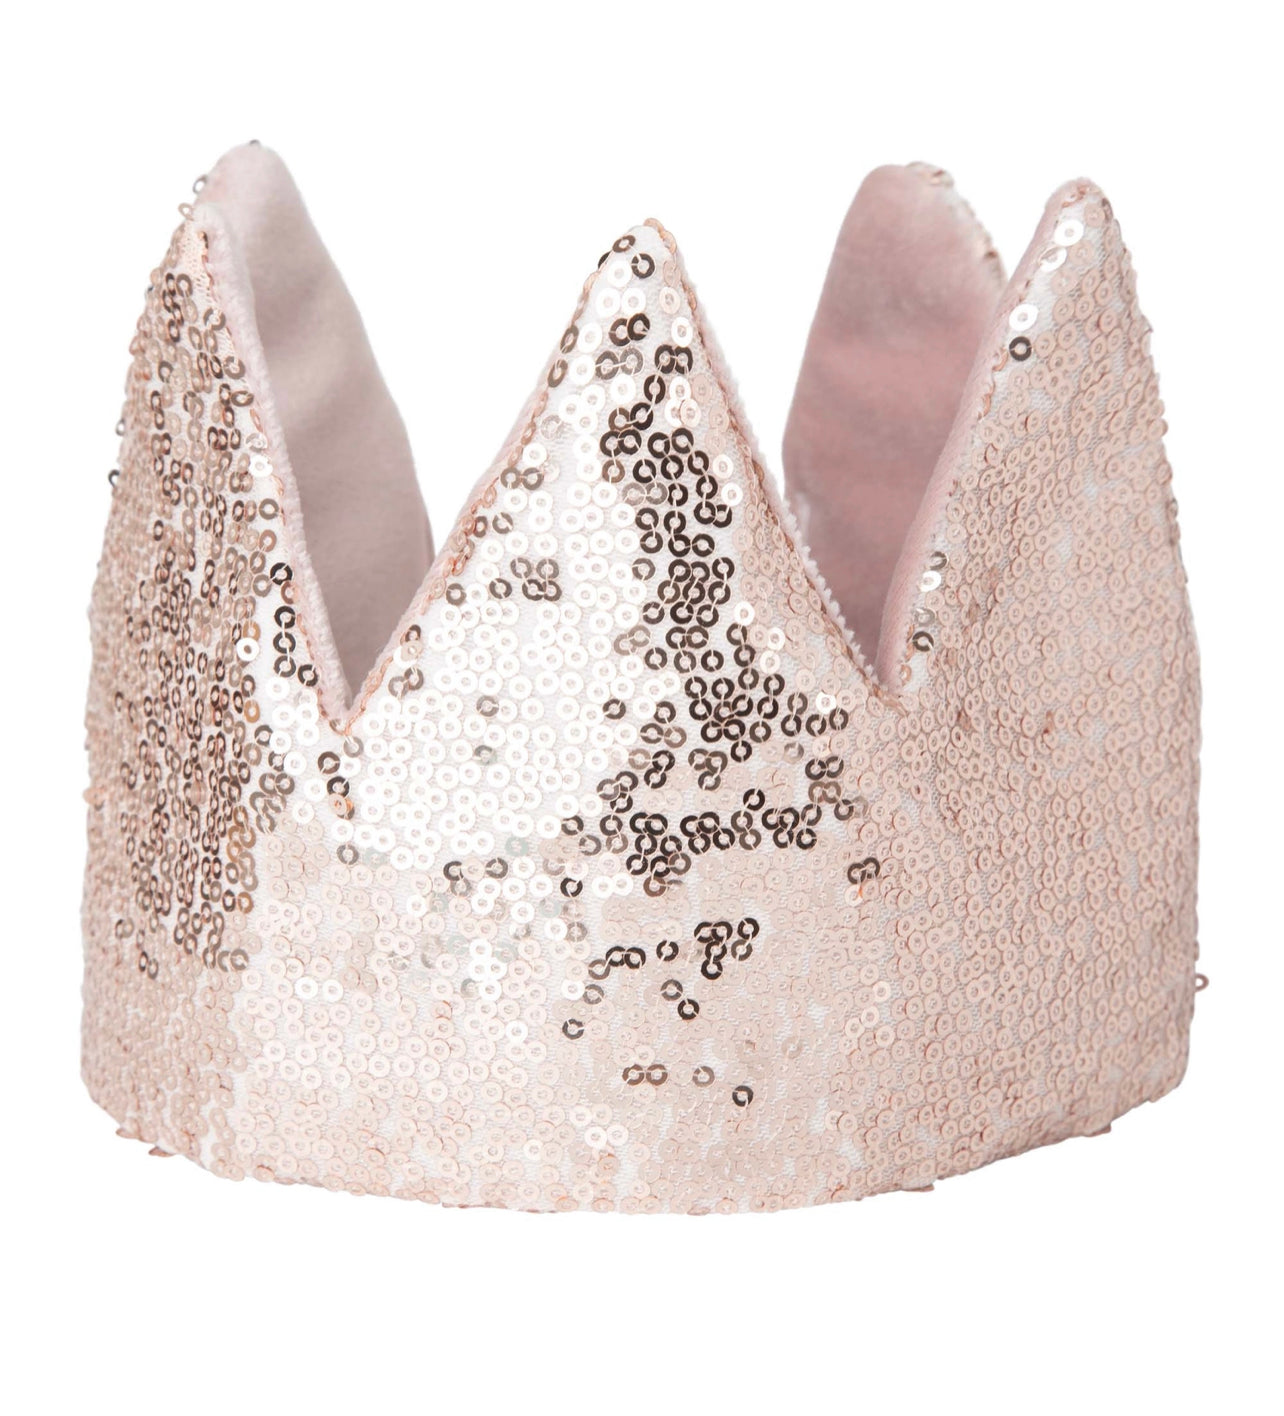 Princess Party Crown & Wand Set - Pink - One Size